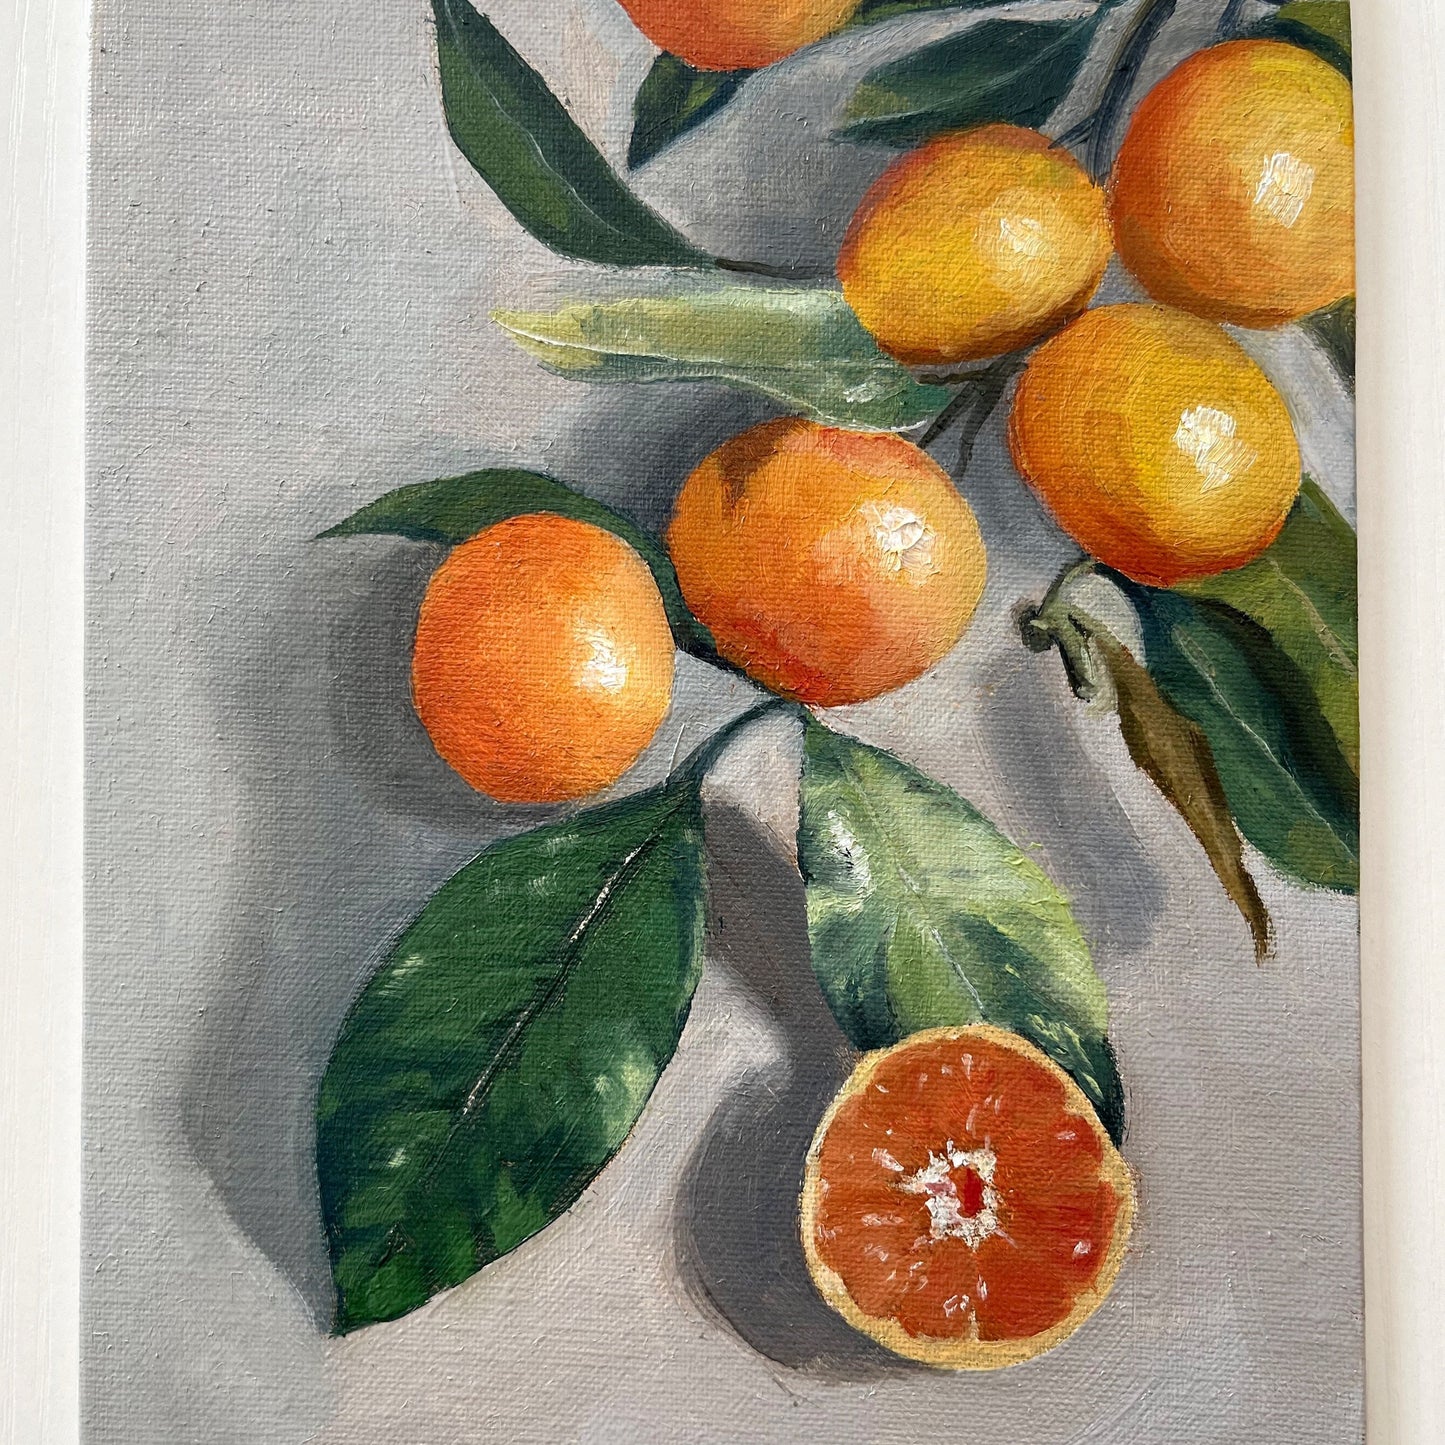 “Clementine Branch” - 6x8” oil on linen panel